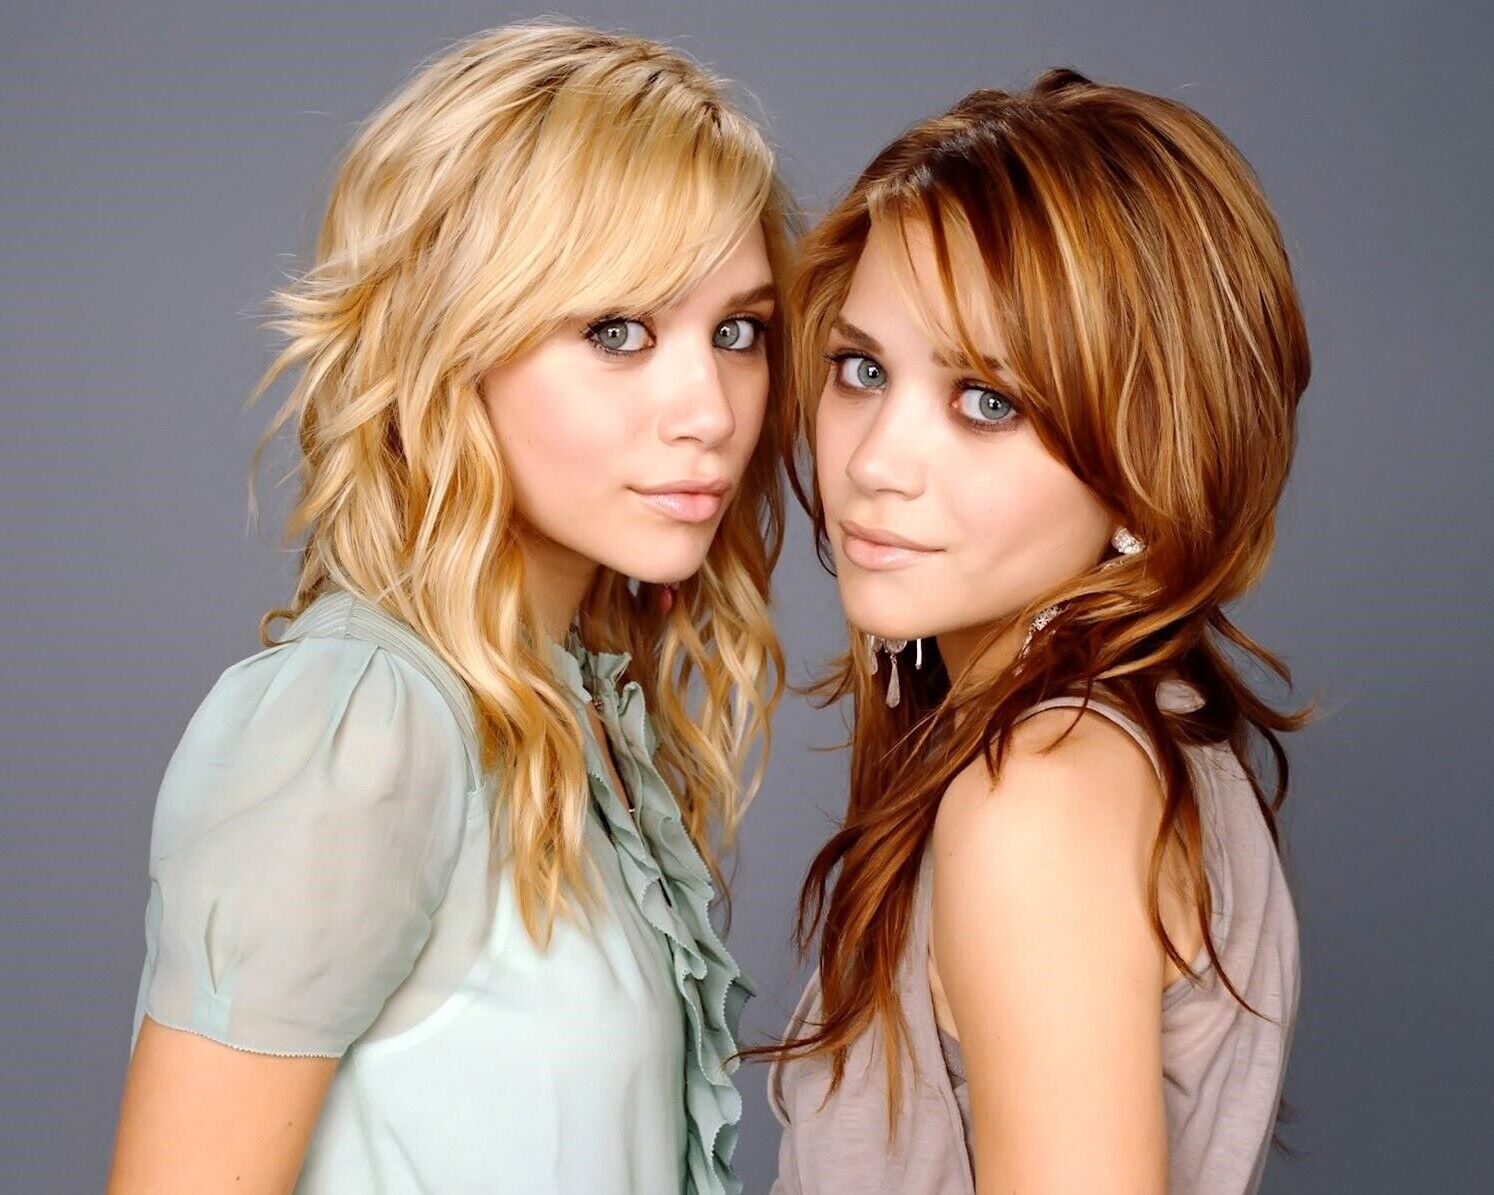 Mary Kate & Ashley Olsen / Twins 8 X 10 / 8x10 Photo Picture Image